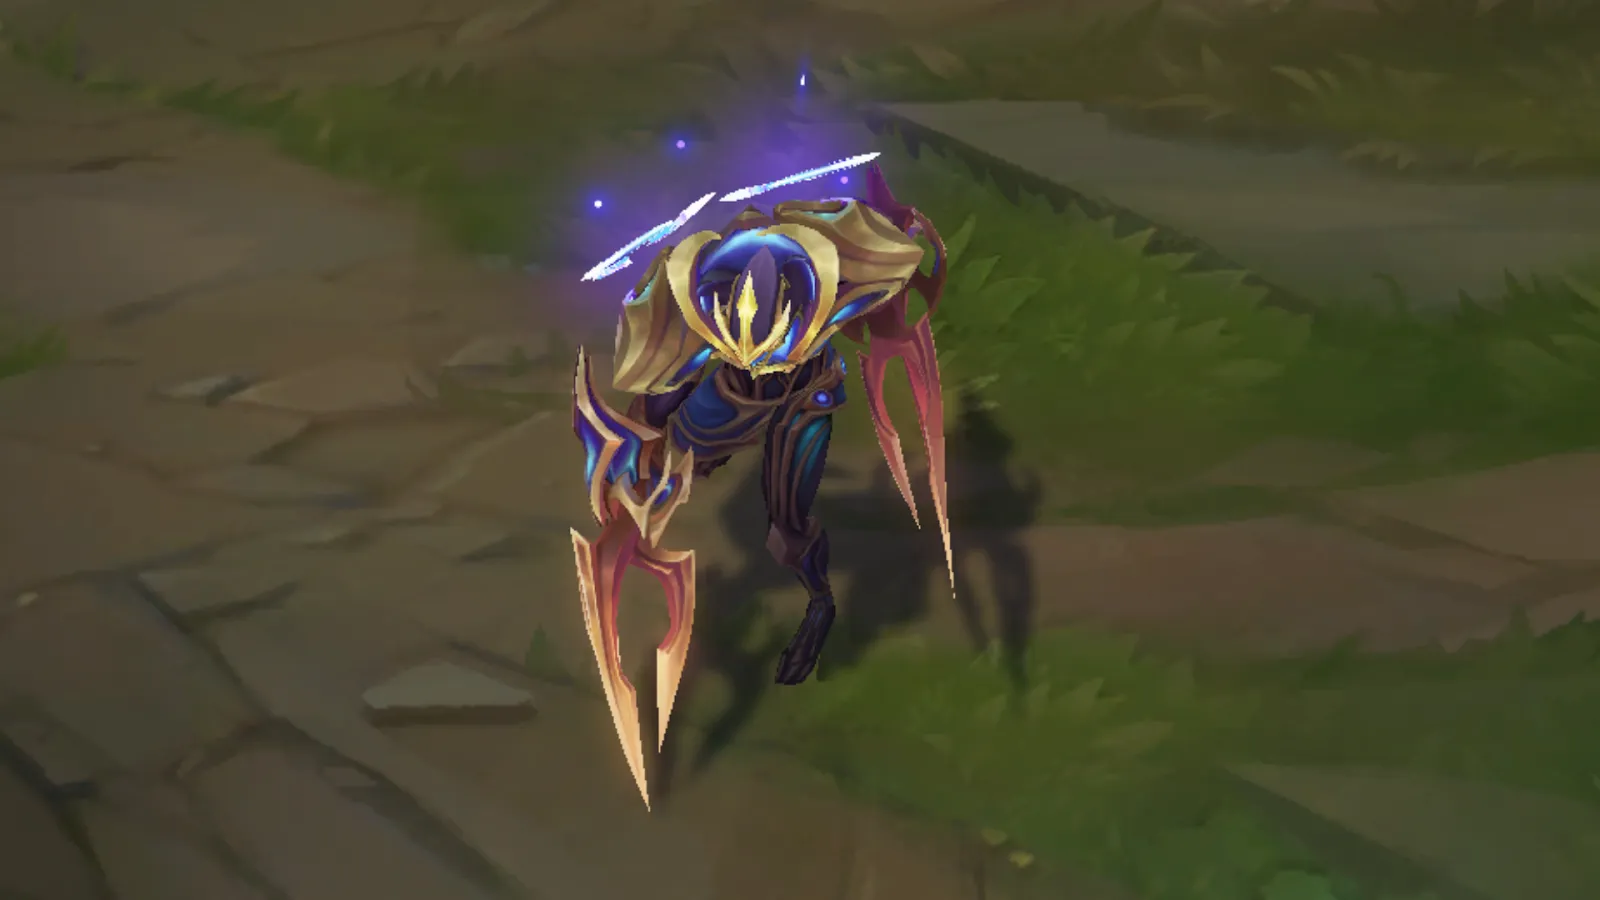 League of Legends - Galaxy Slayer Zed in-game